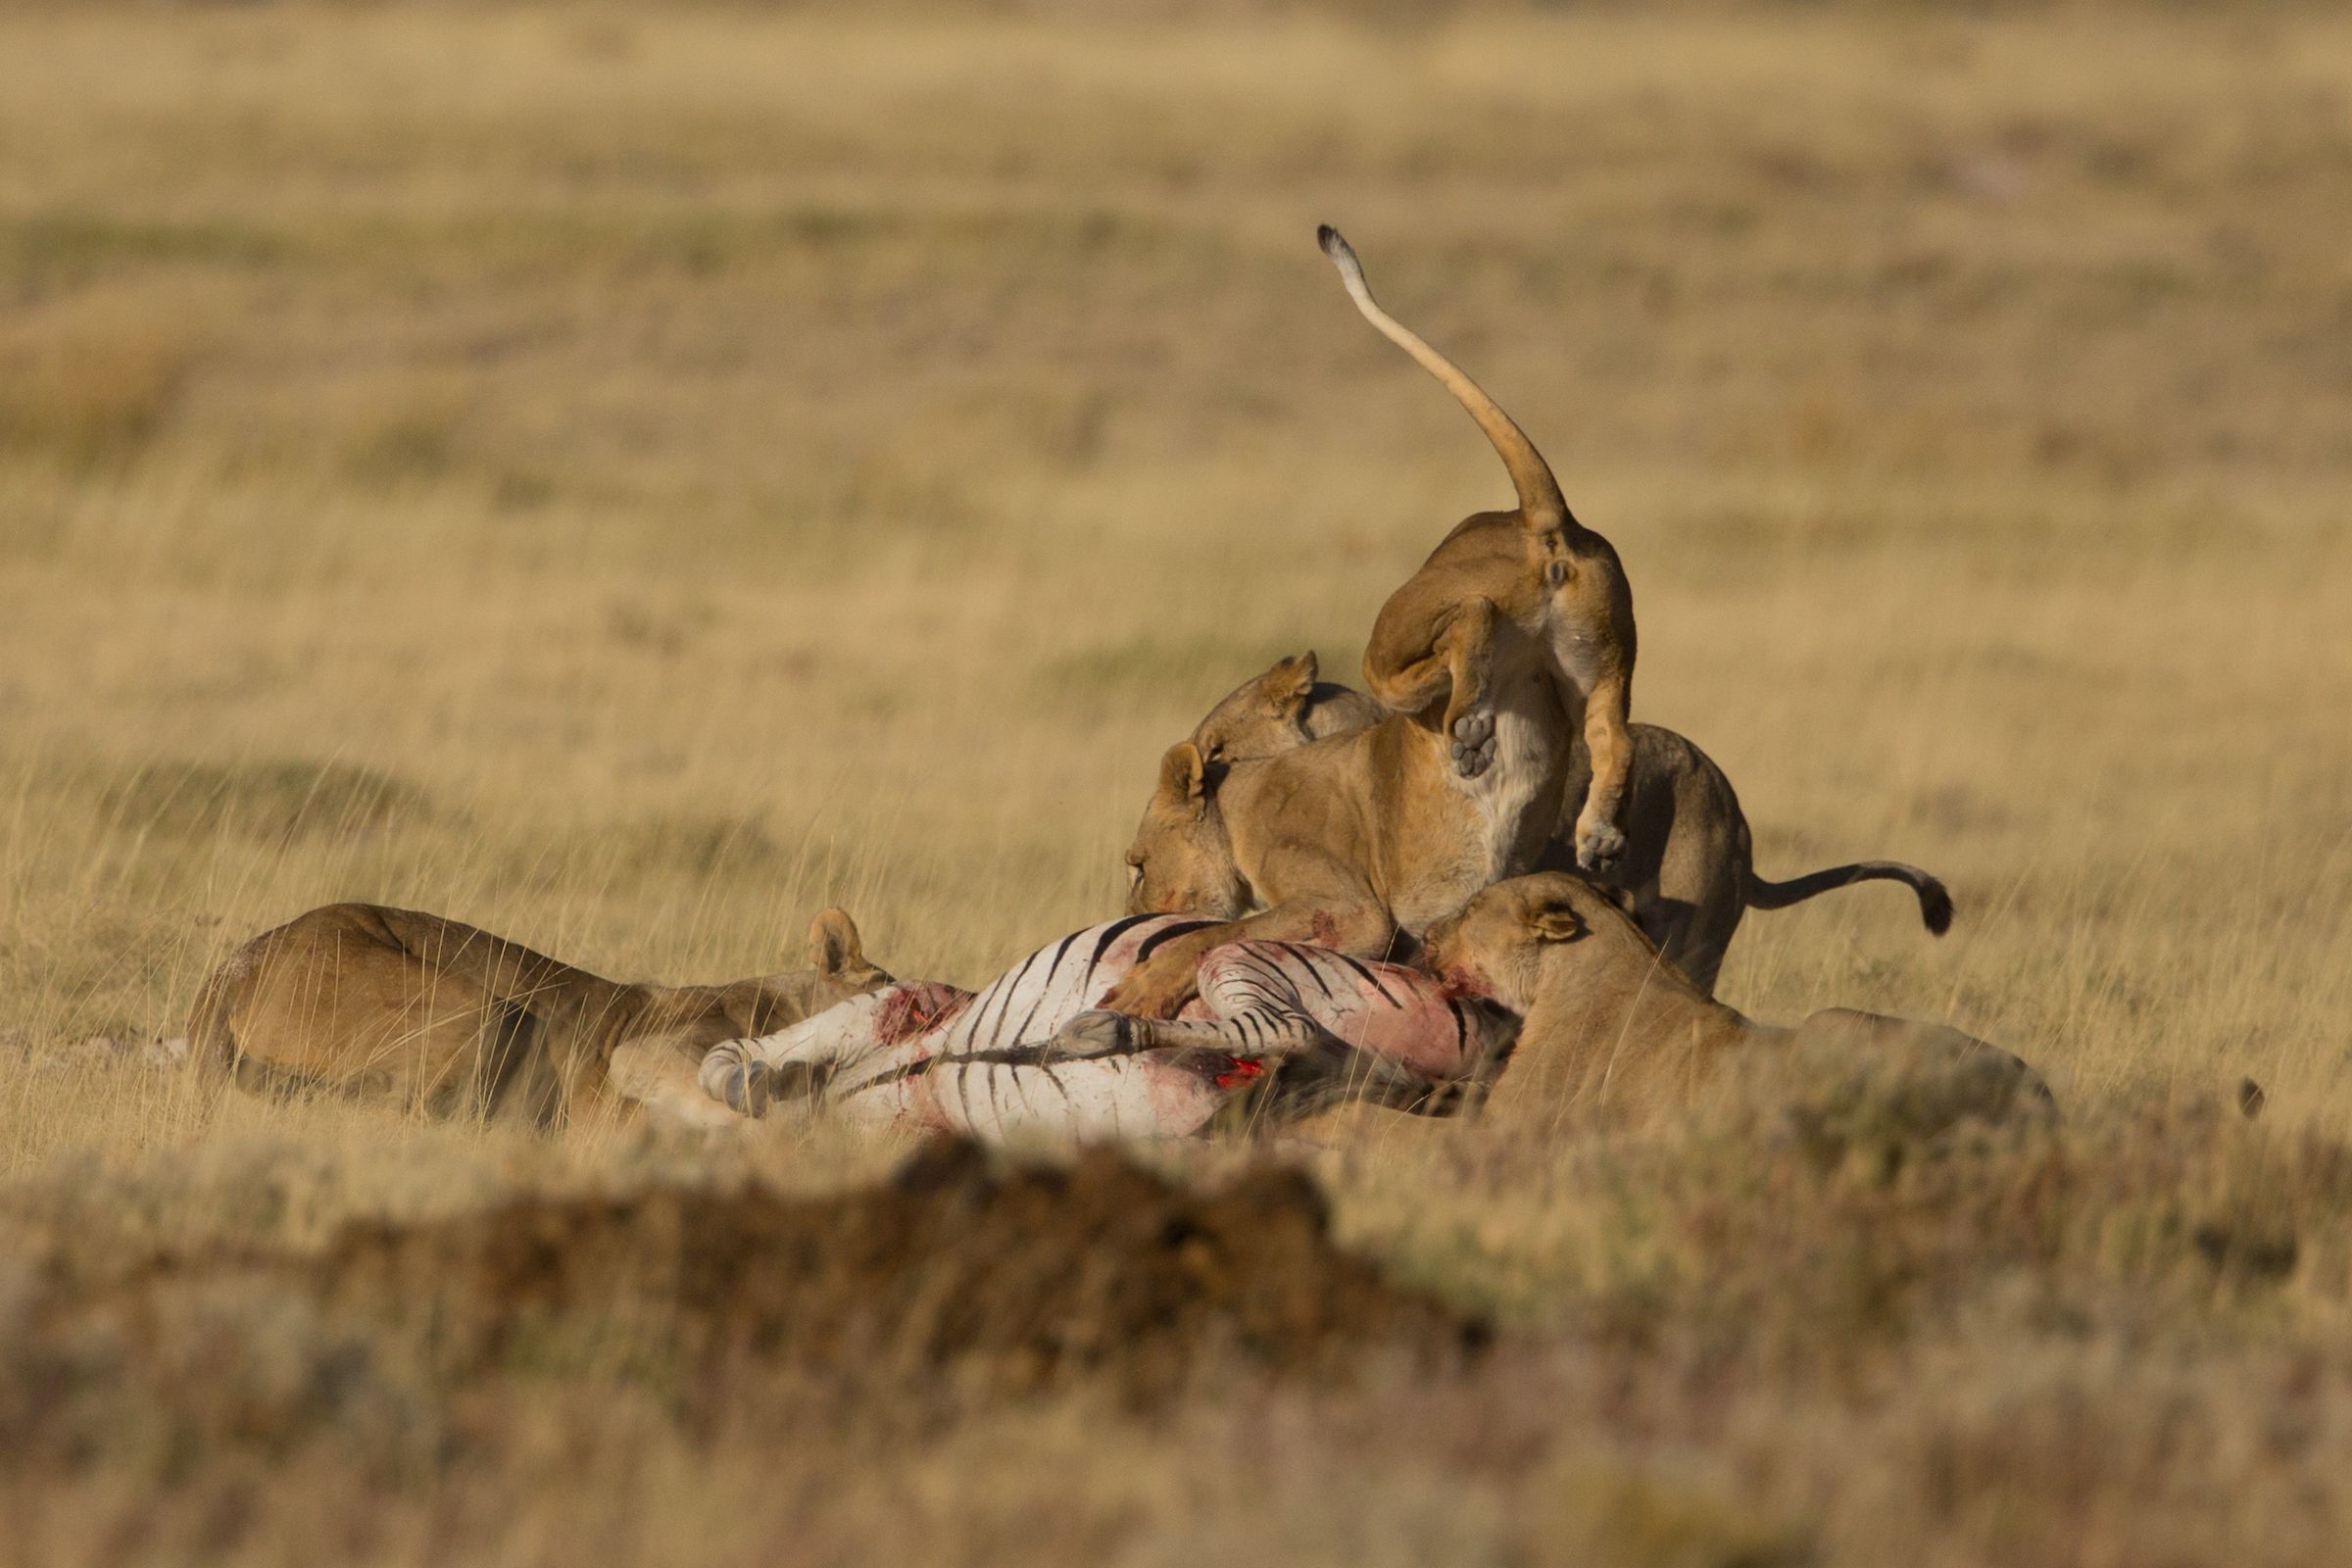 Lions hunting in Etosha on our wildlife photography tour of Namibia